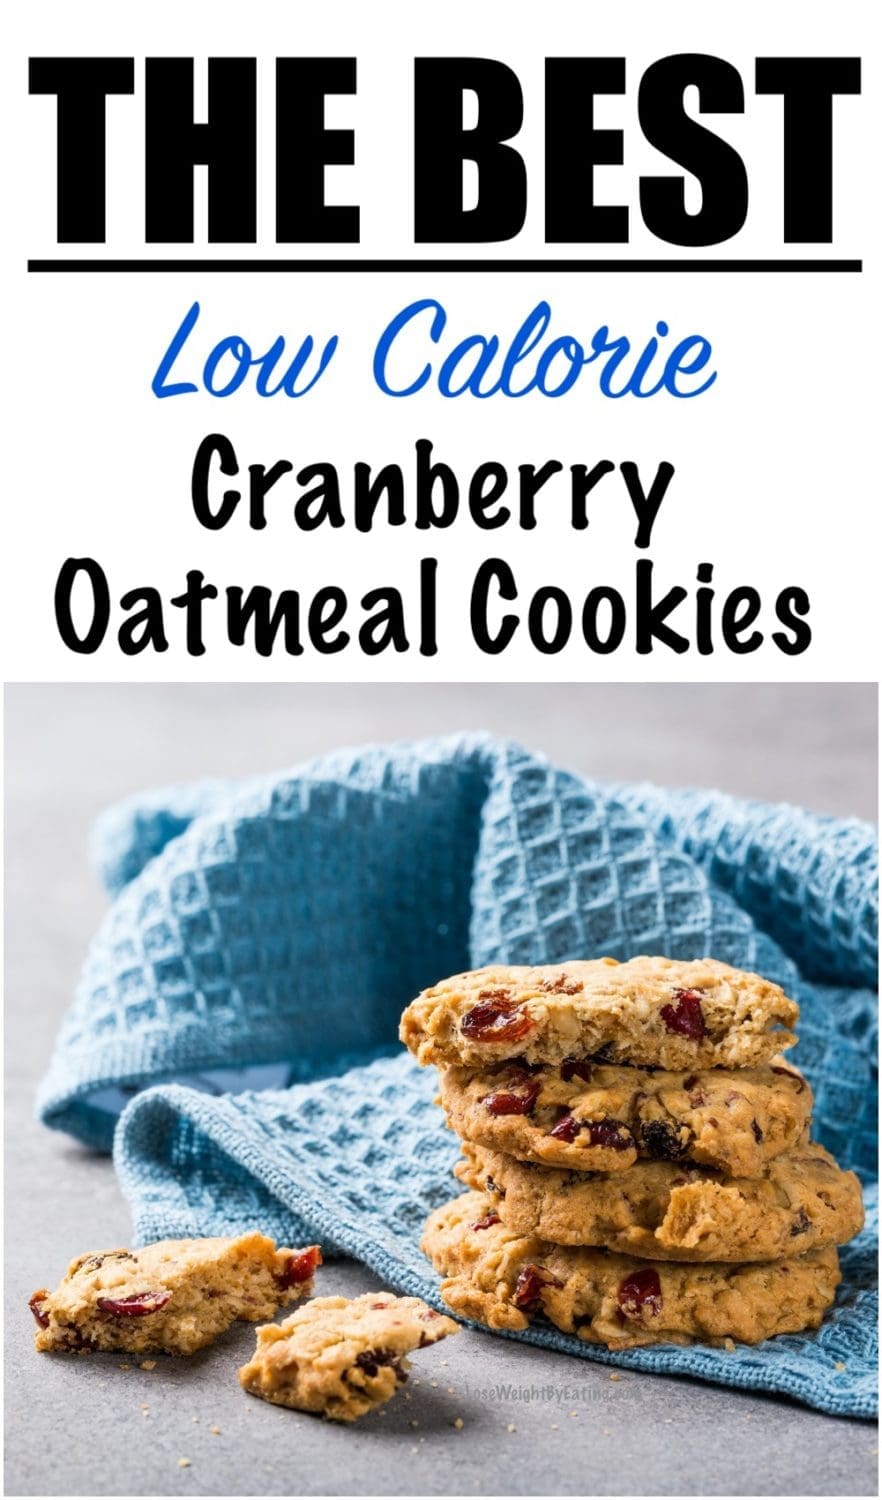 Healthy Cranberry Oatmeal Cookies Recipe {LOW CALORIE}